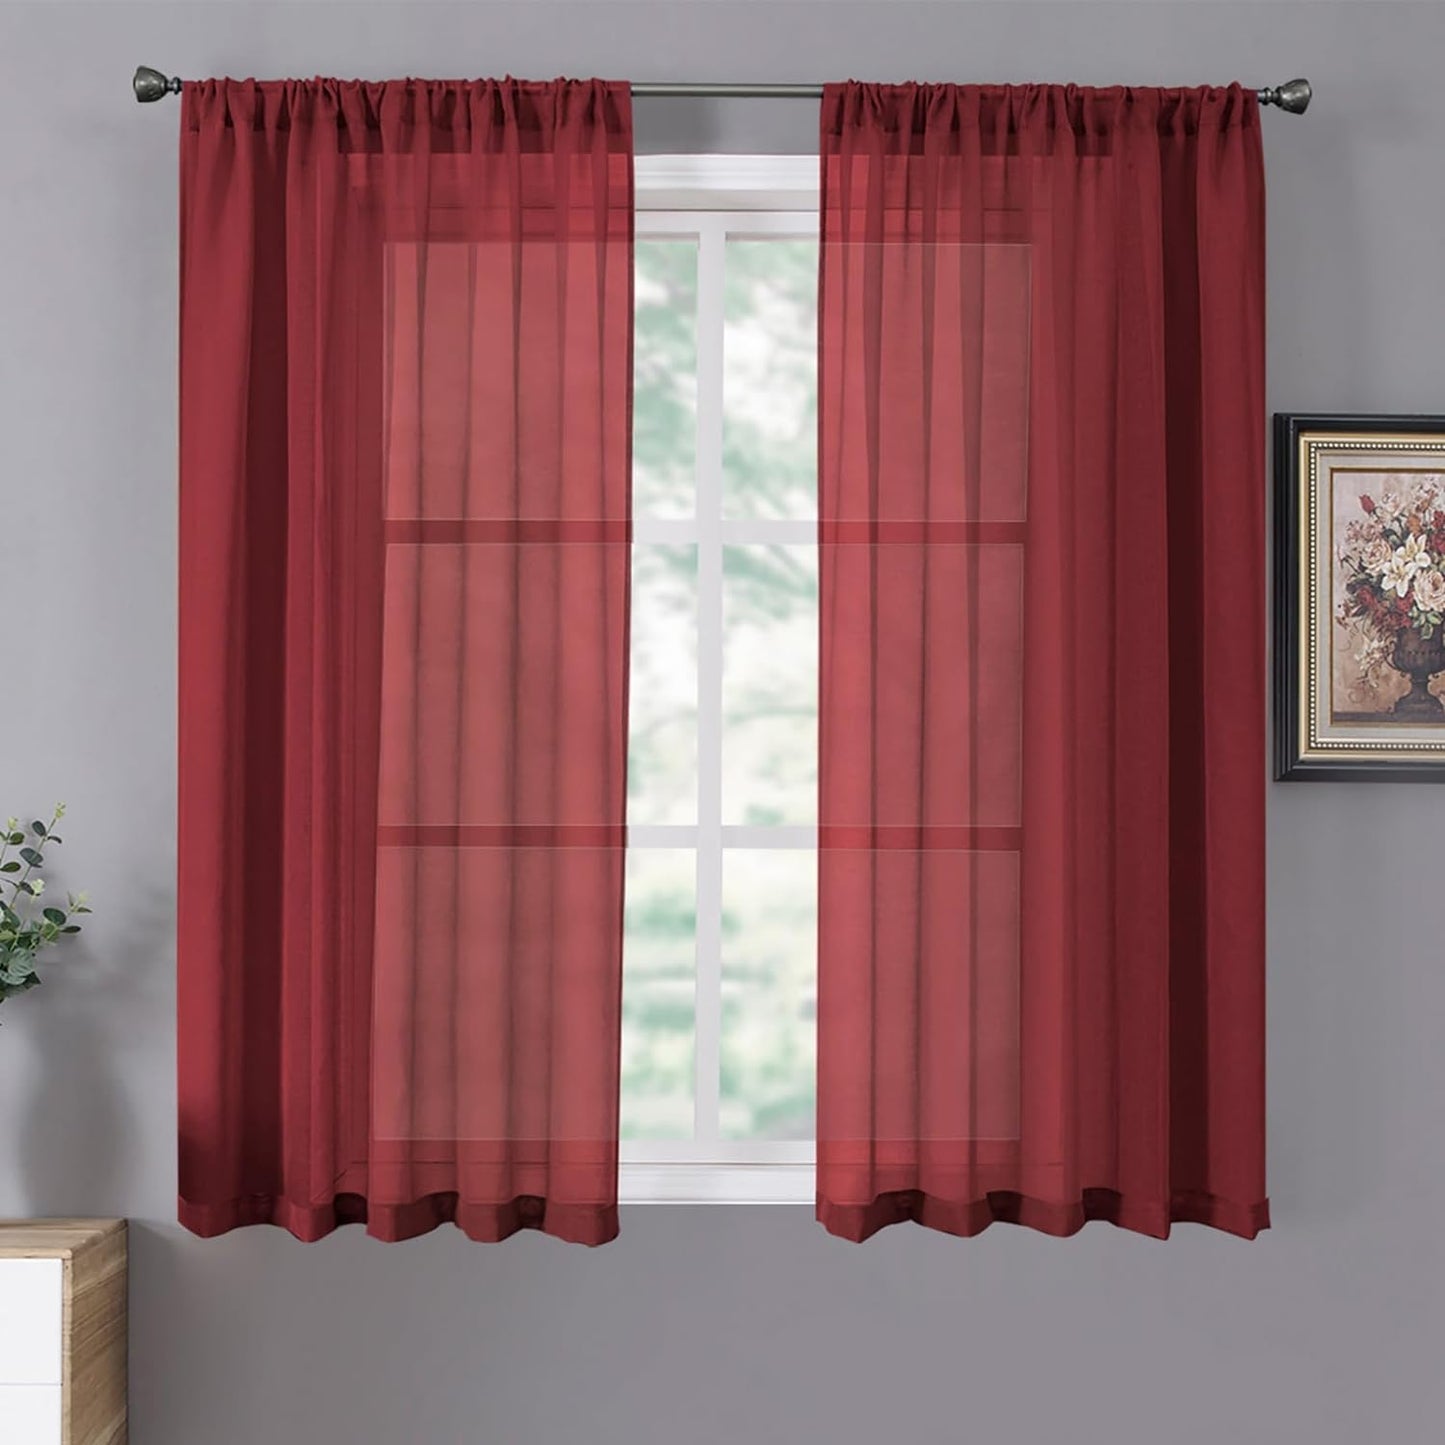 Tollpiz Short Sheer Curtains Linen Textured Bedroom Curtain Sheers Light Filtering Rod Pocket Voile Curtains for Living Room, 54 X 45 Inches Long, White, Set of 2 Panels  Tollpiz Tex Burgundy Red 54"W X 54"L 